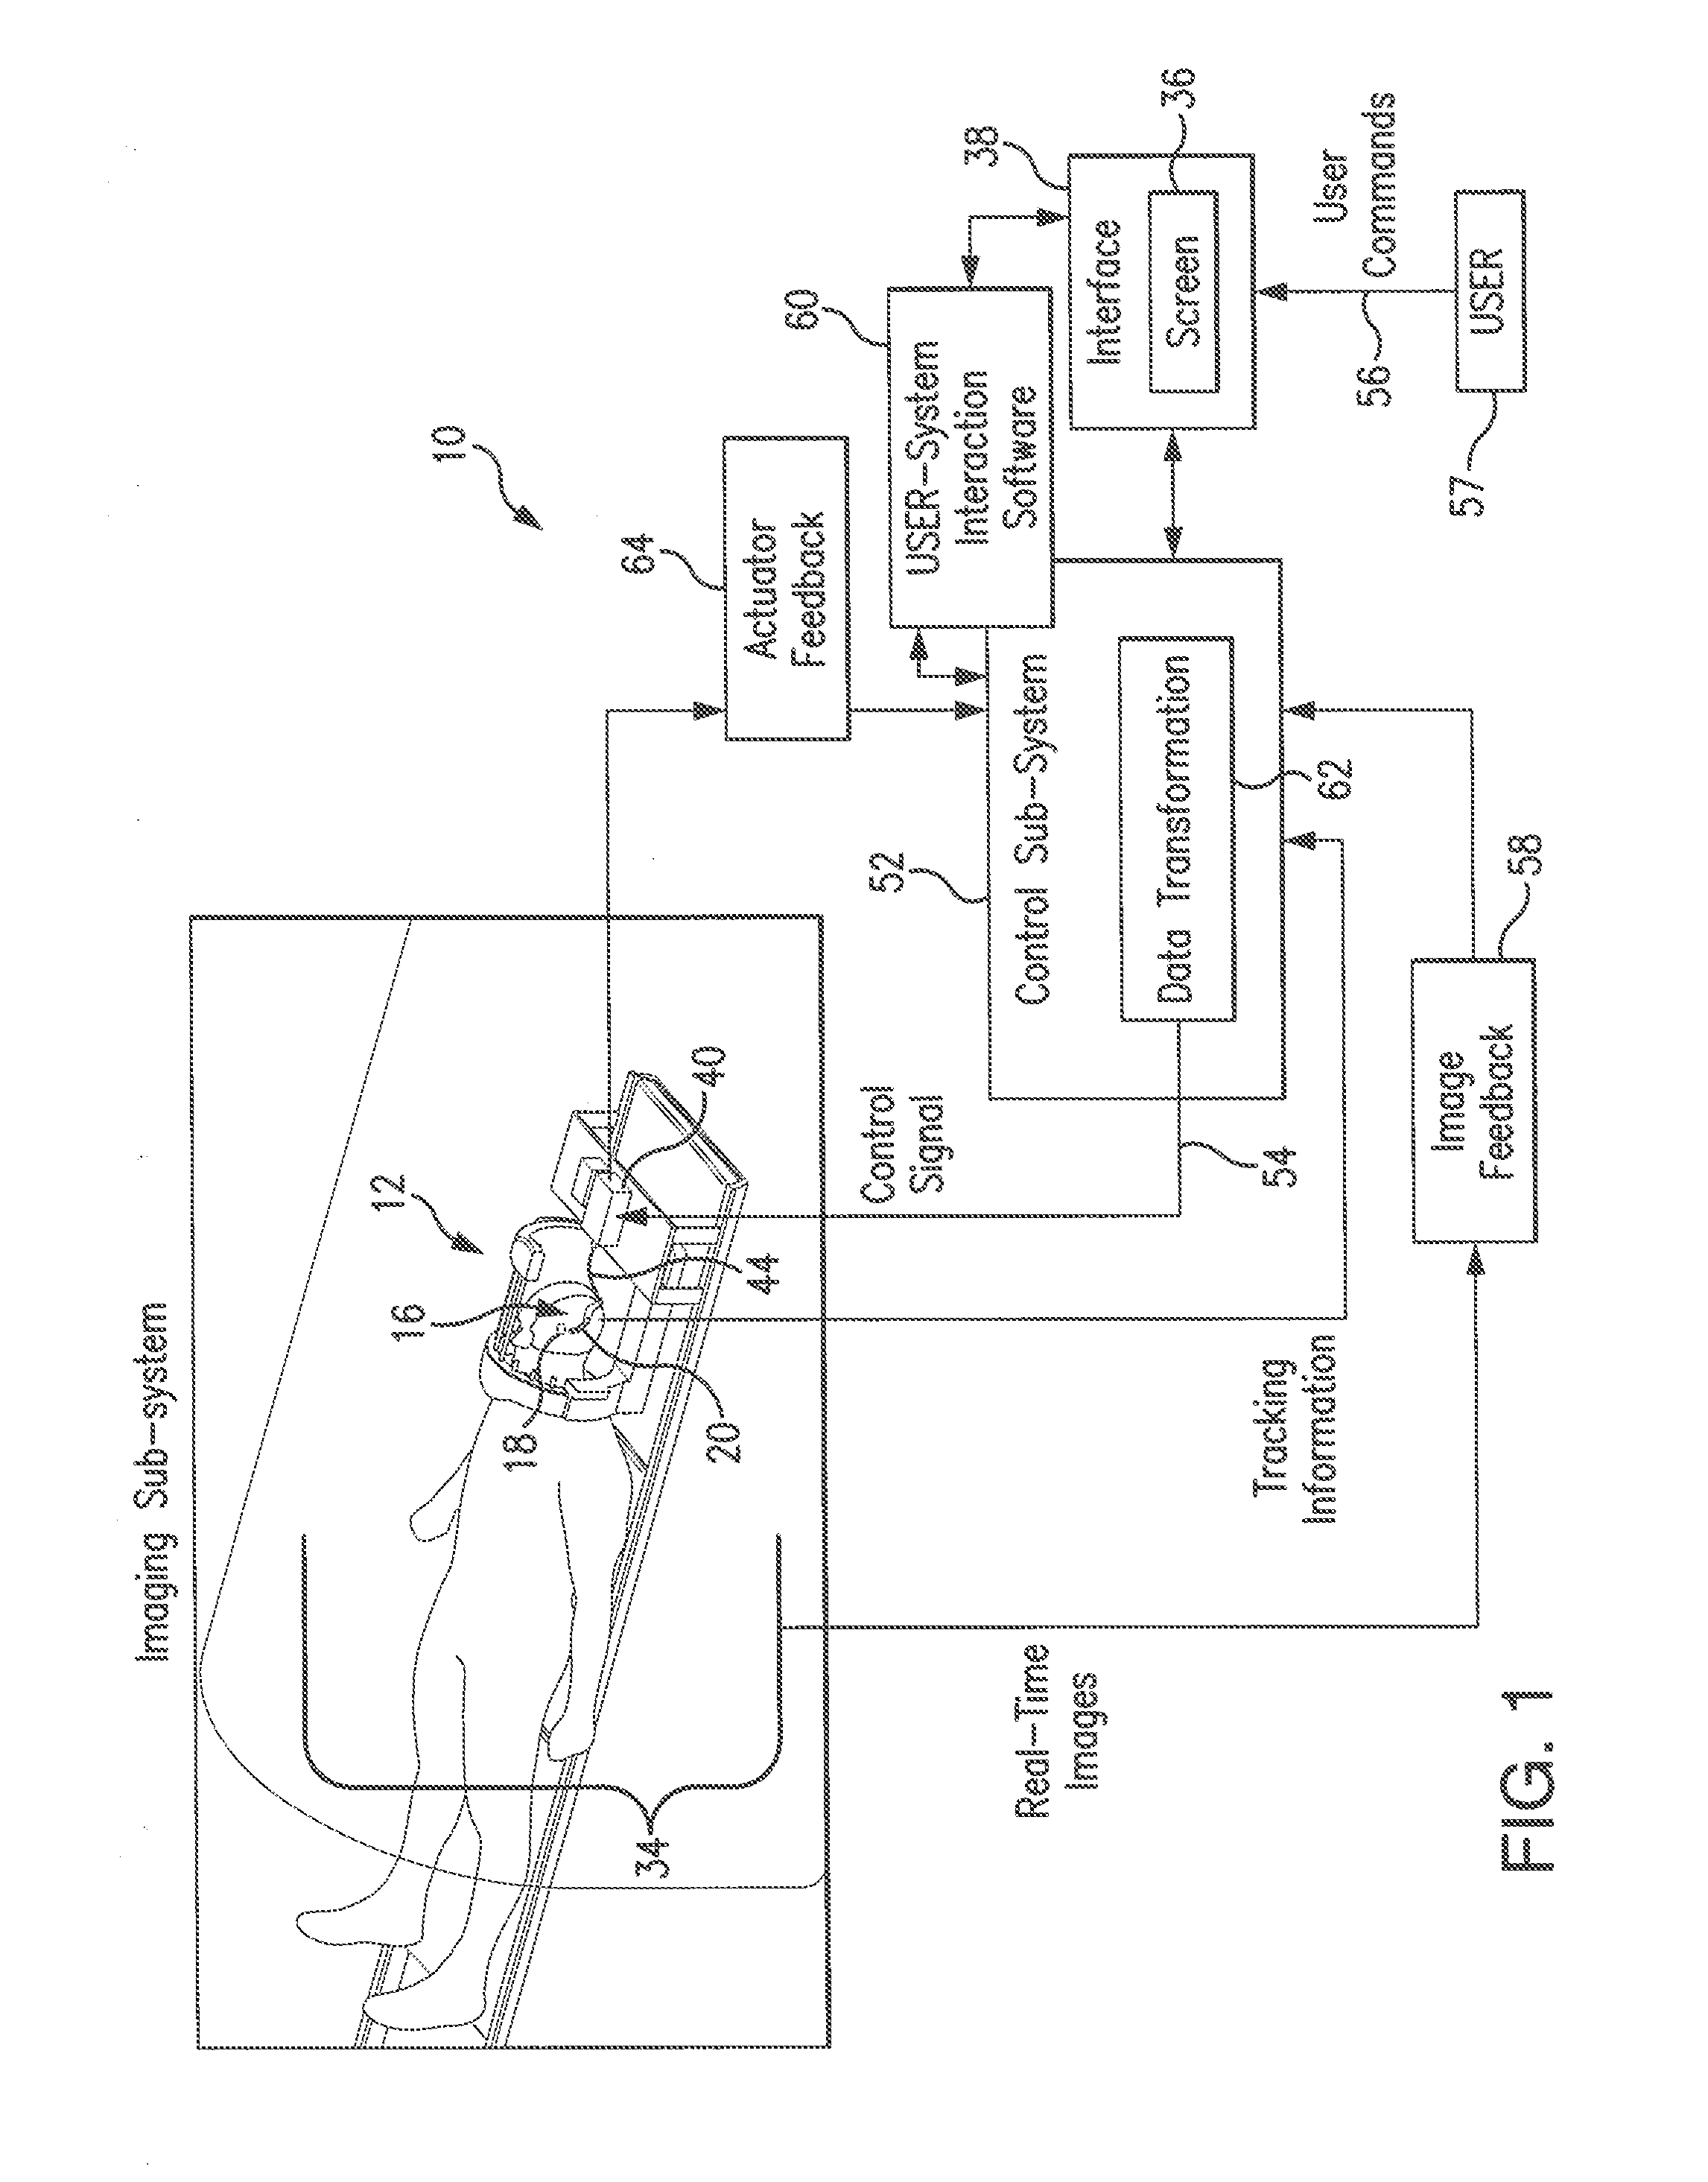 Minimally invasive neurosurgical intracranial robot system and method